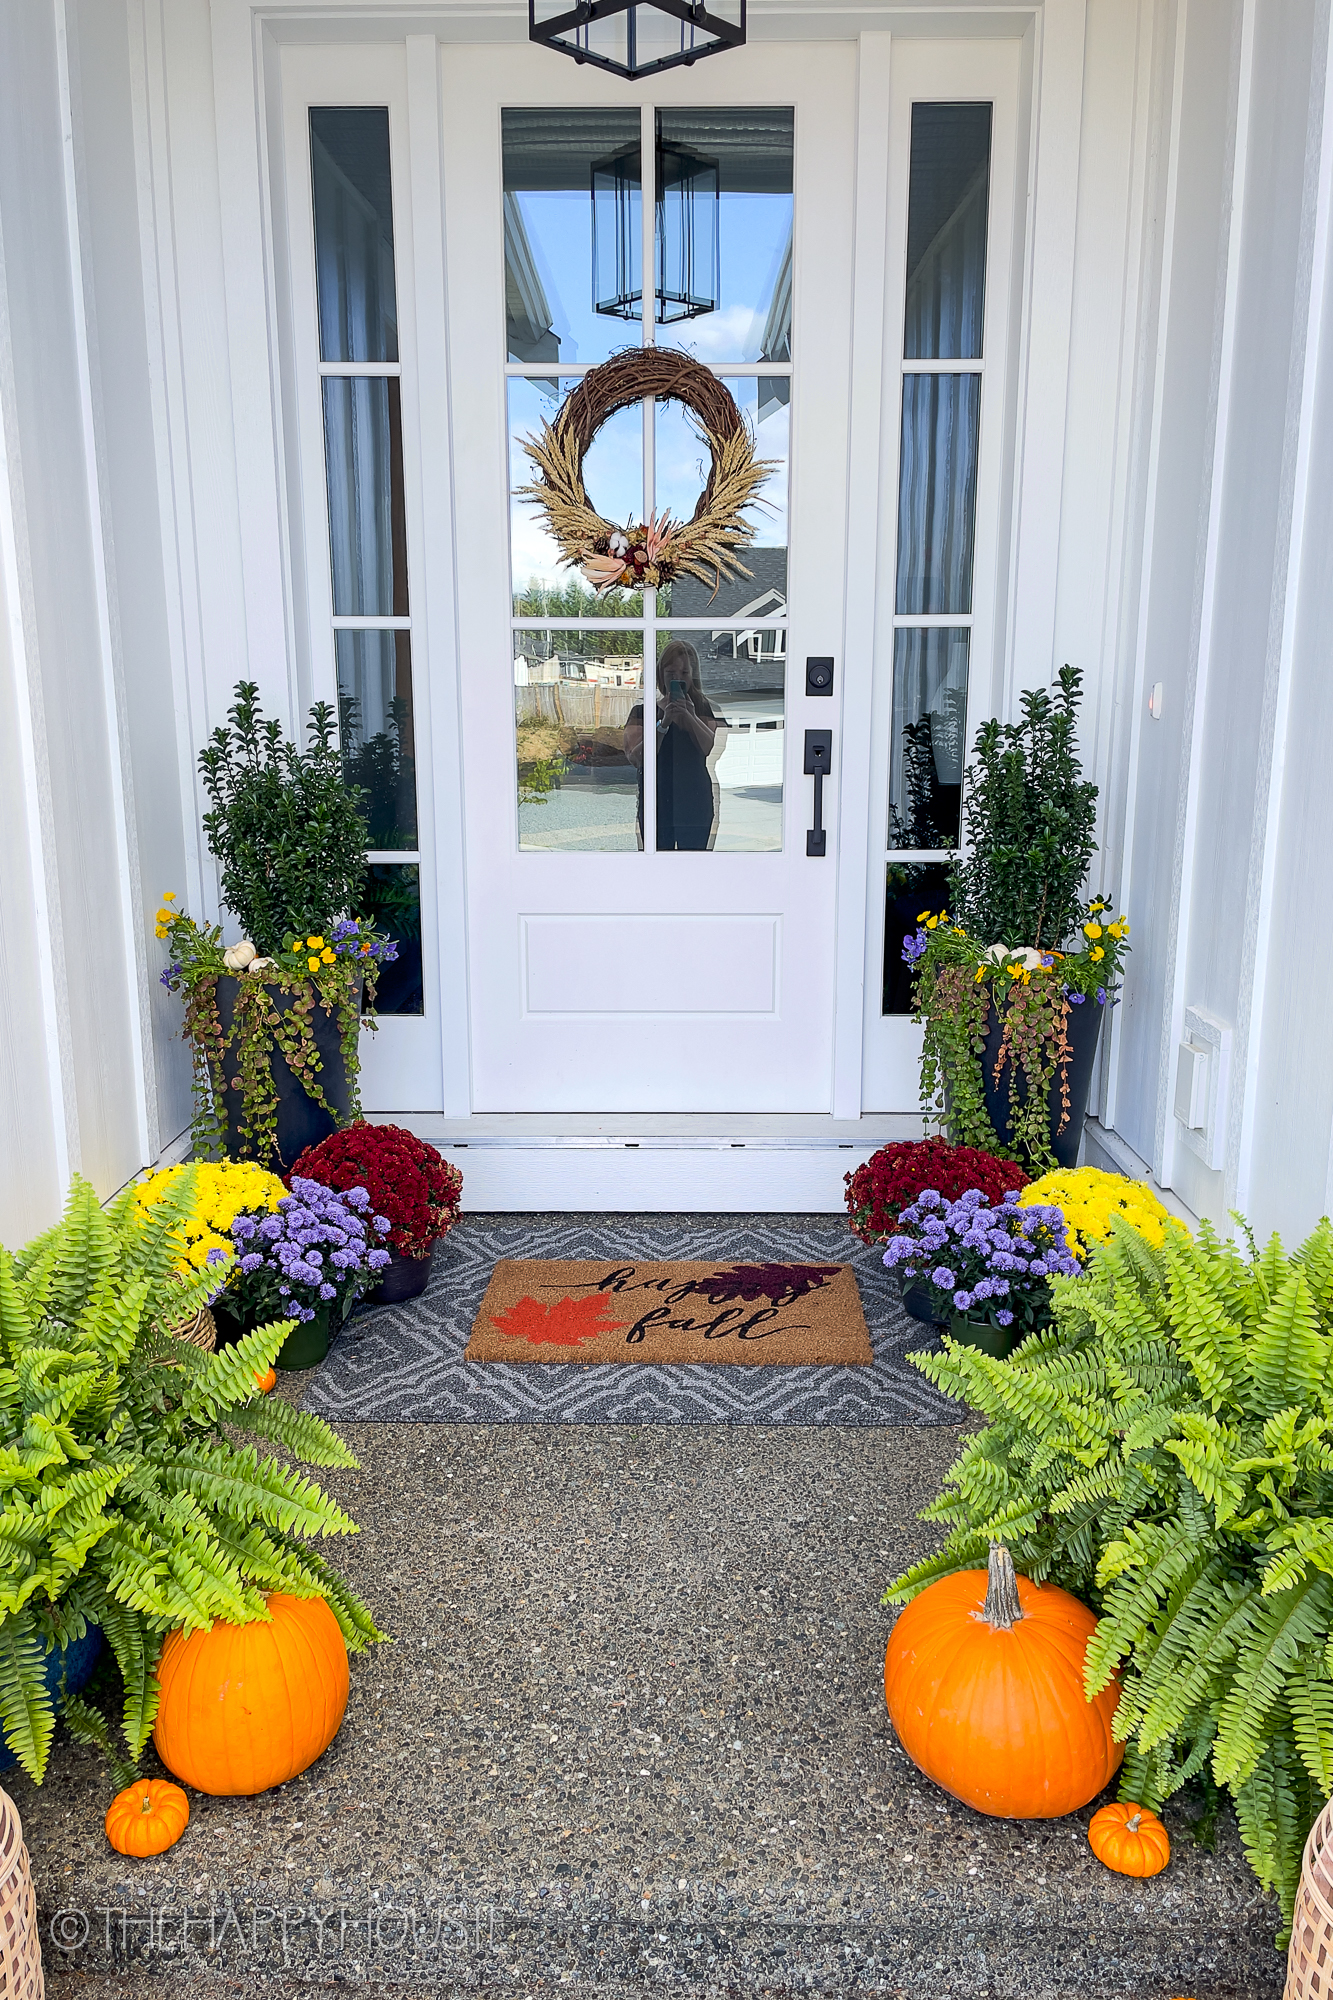 A wooden white door with glass, there is pumpkins on the front porch.